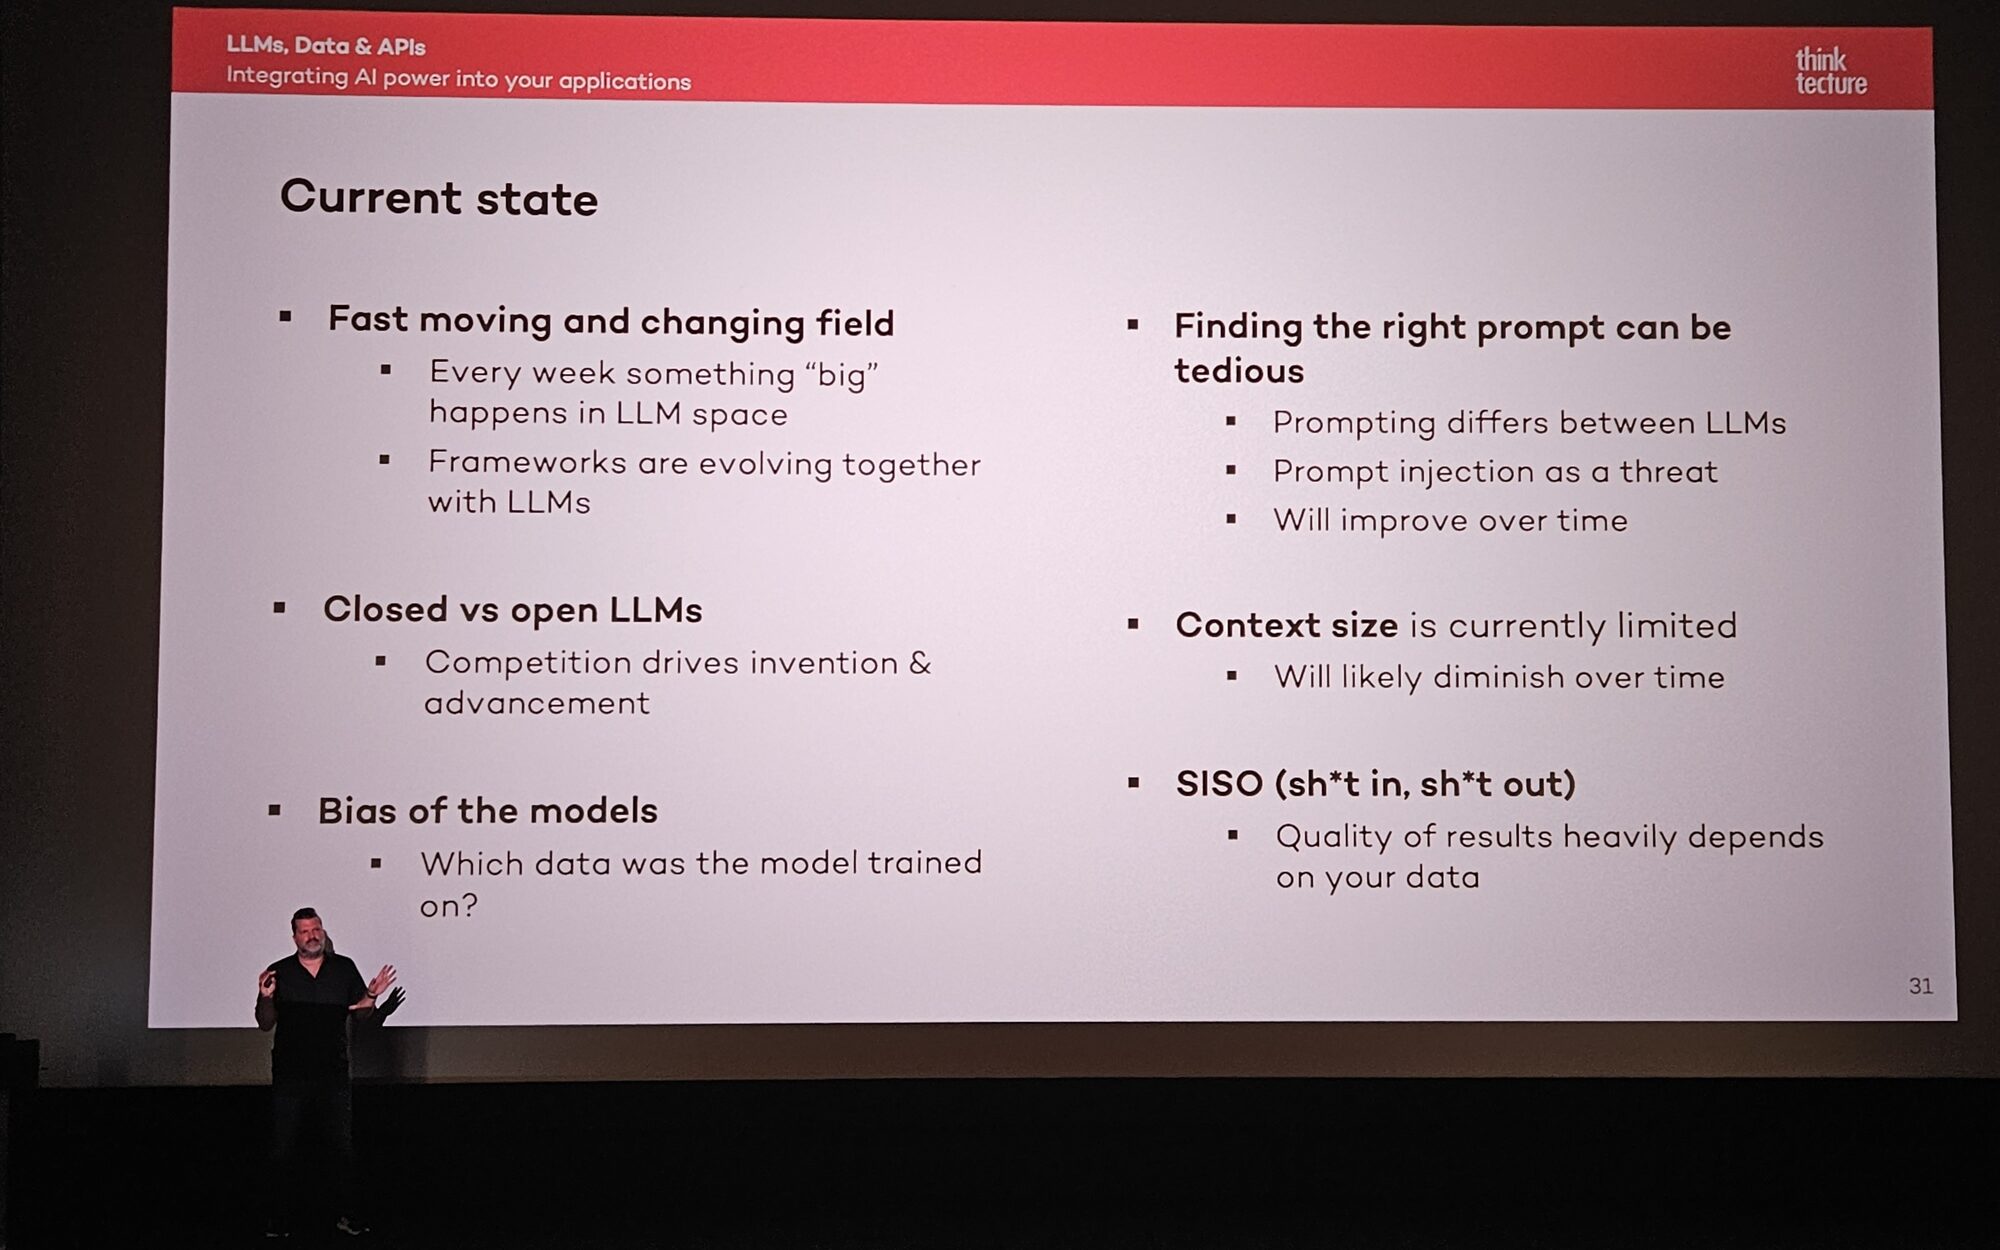 Slide with Christian Weyer standing in front showing bullet points of the current state of LLMs: Fast moving and changing field, Closed vs open LLMs, Bias of the models, Finding the right prompt can be tedious, Context site is currently limited, SISO (Shit in, shit out)